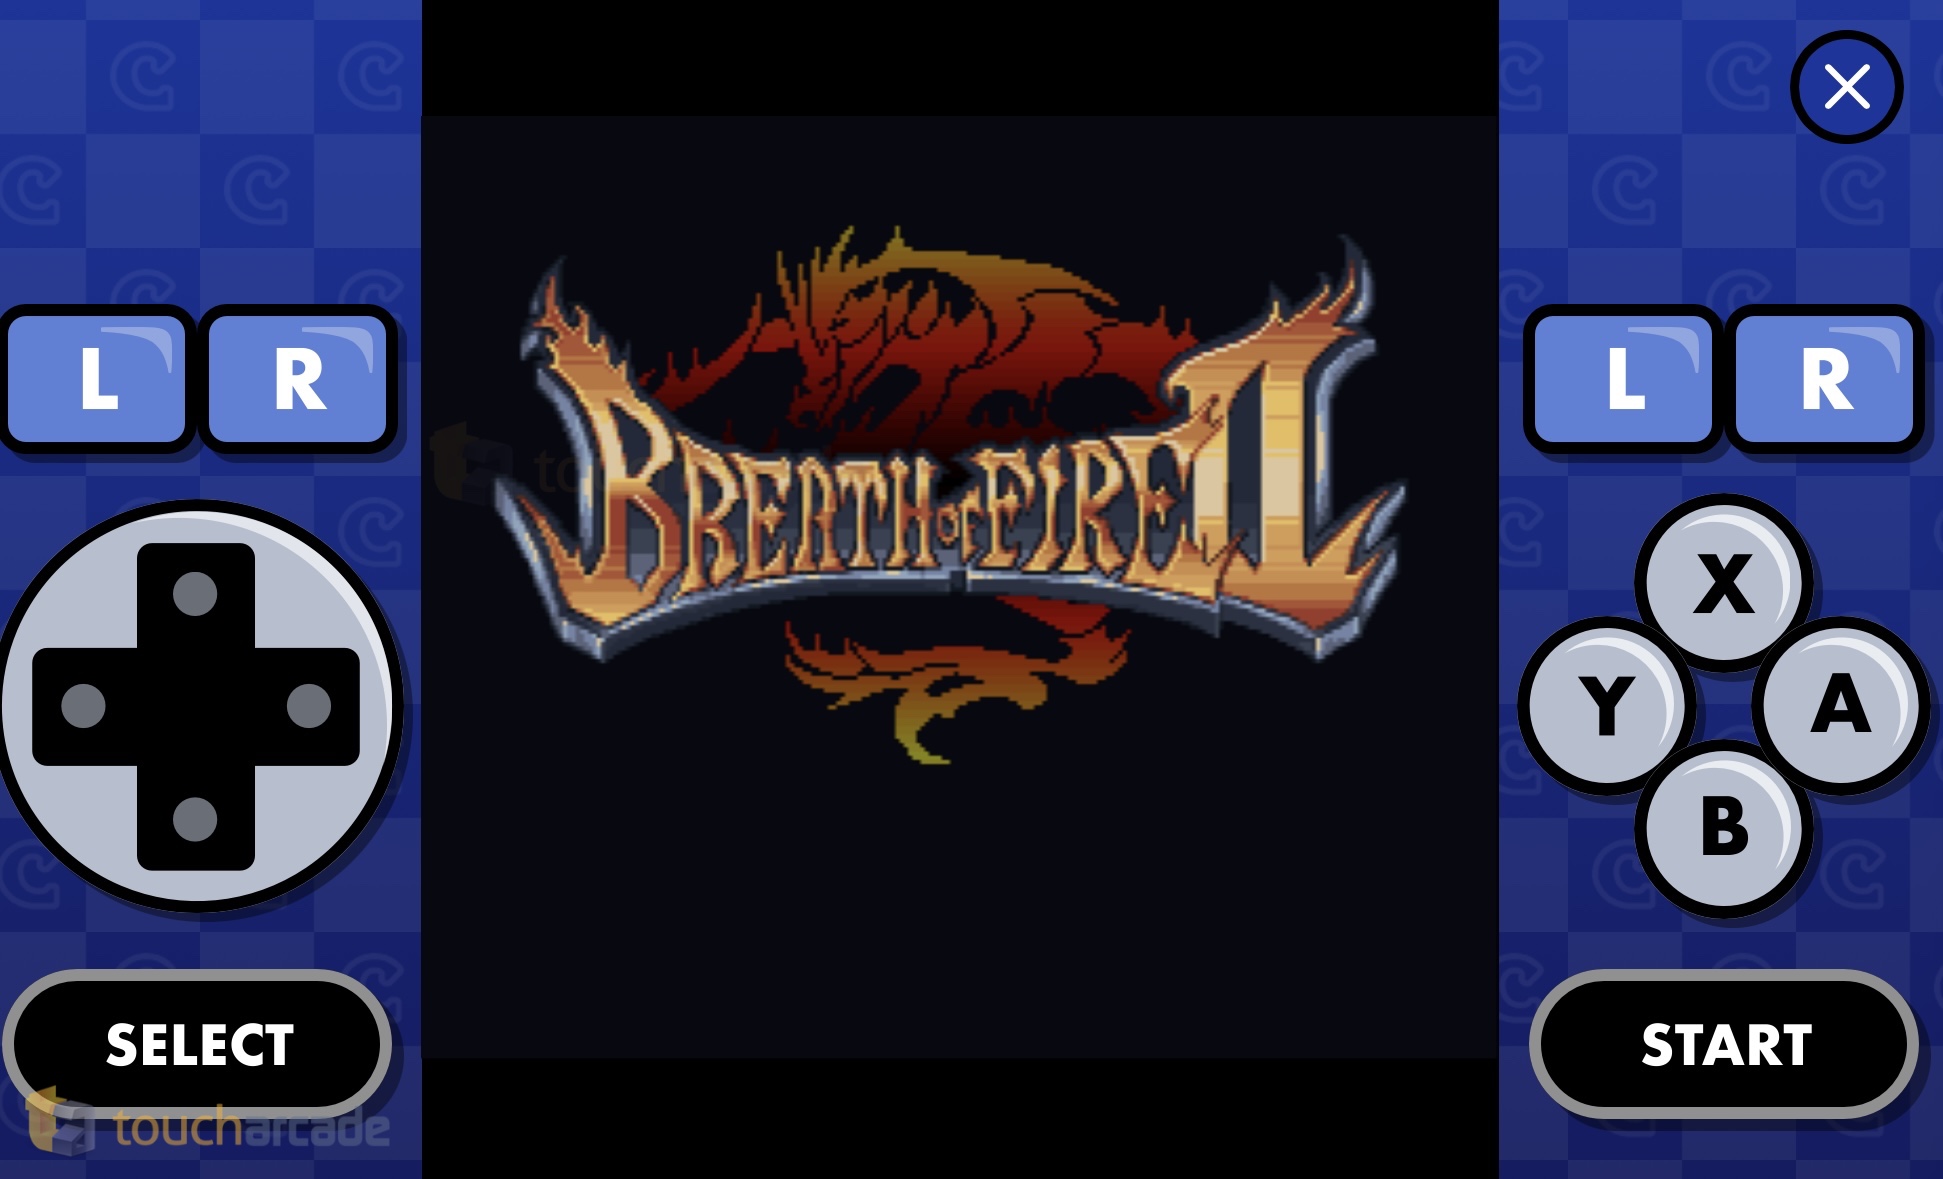 Play ‘Breath of Fire II’ Free on Your Mobile Browser Through New ‘Capcom Town’ Digital Museum Website Update